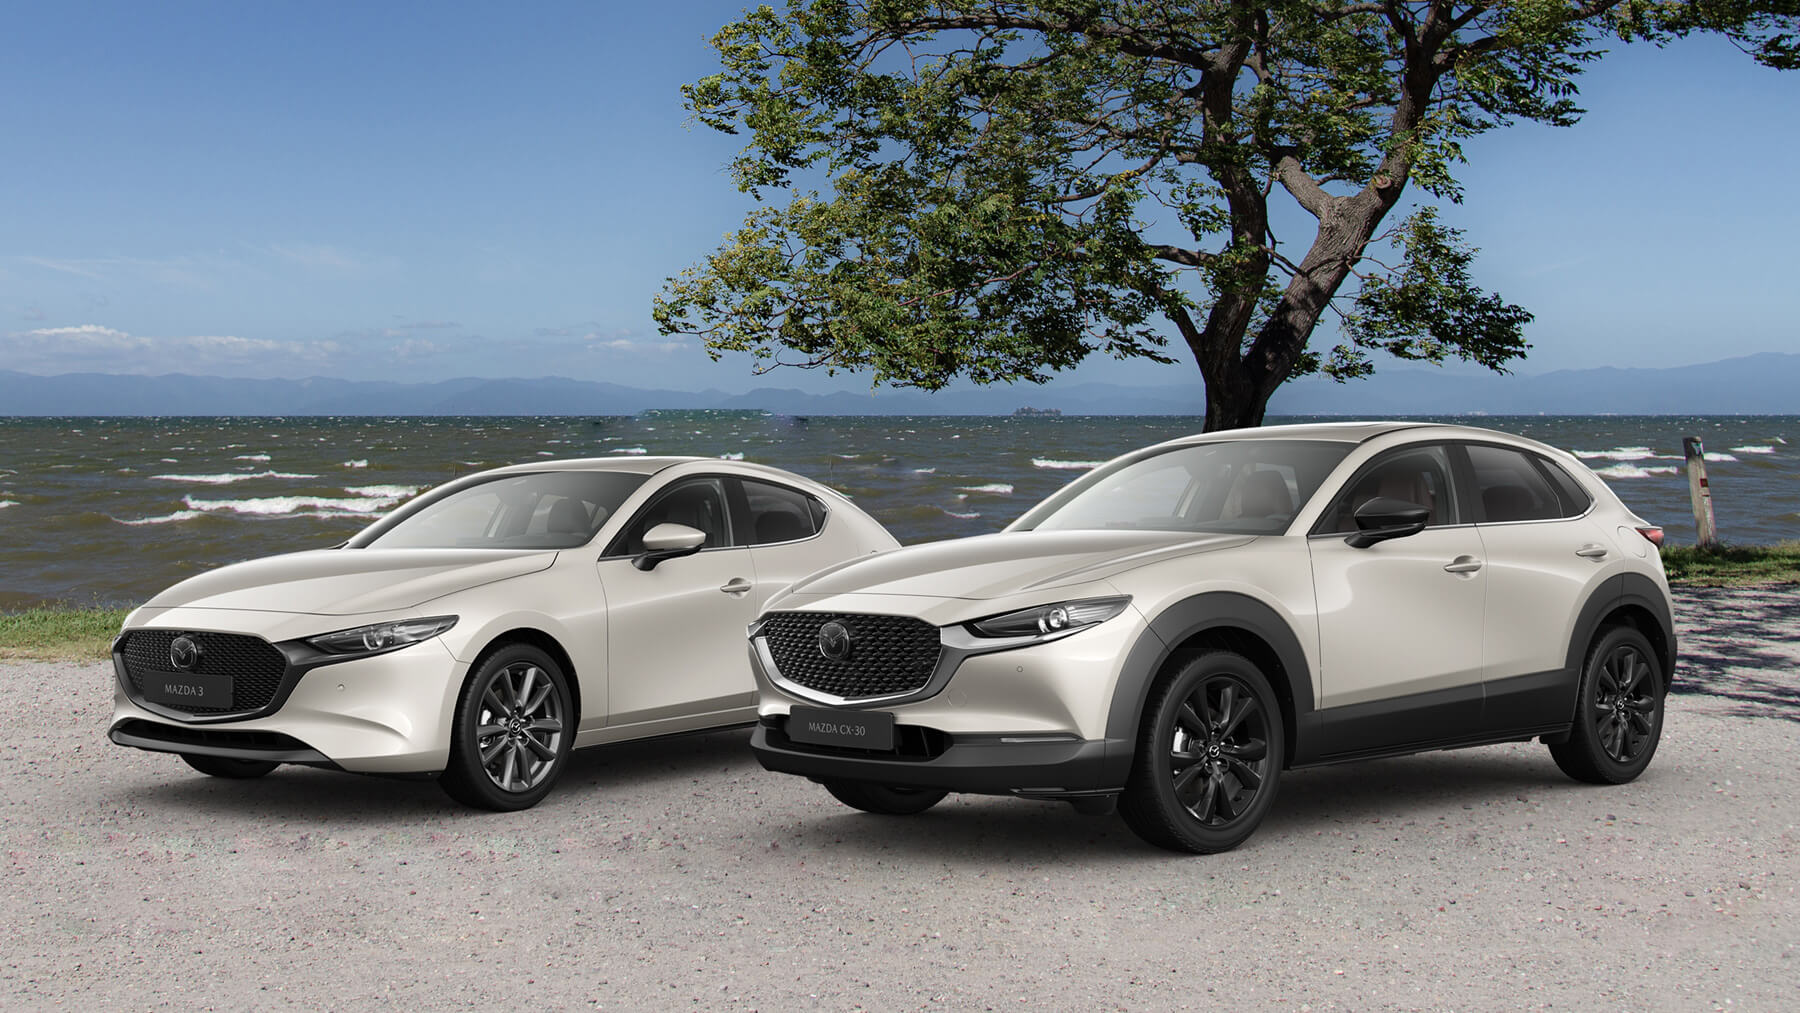 mazda hybrid suv cars on the top of the hill